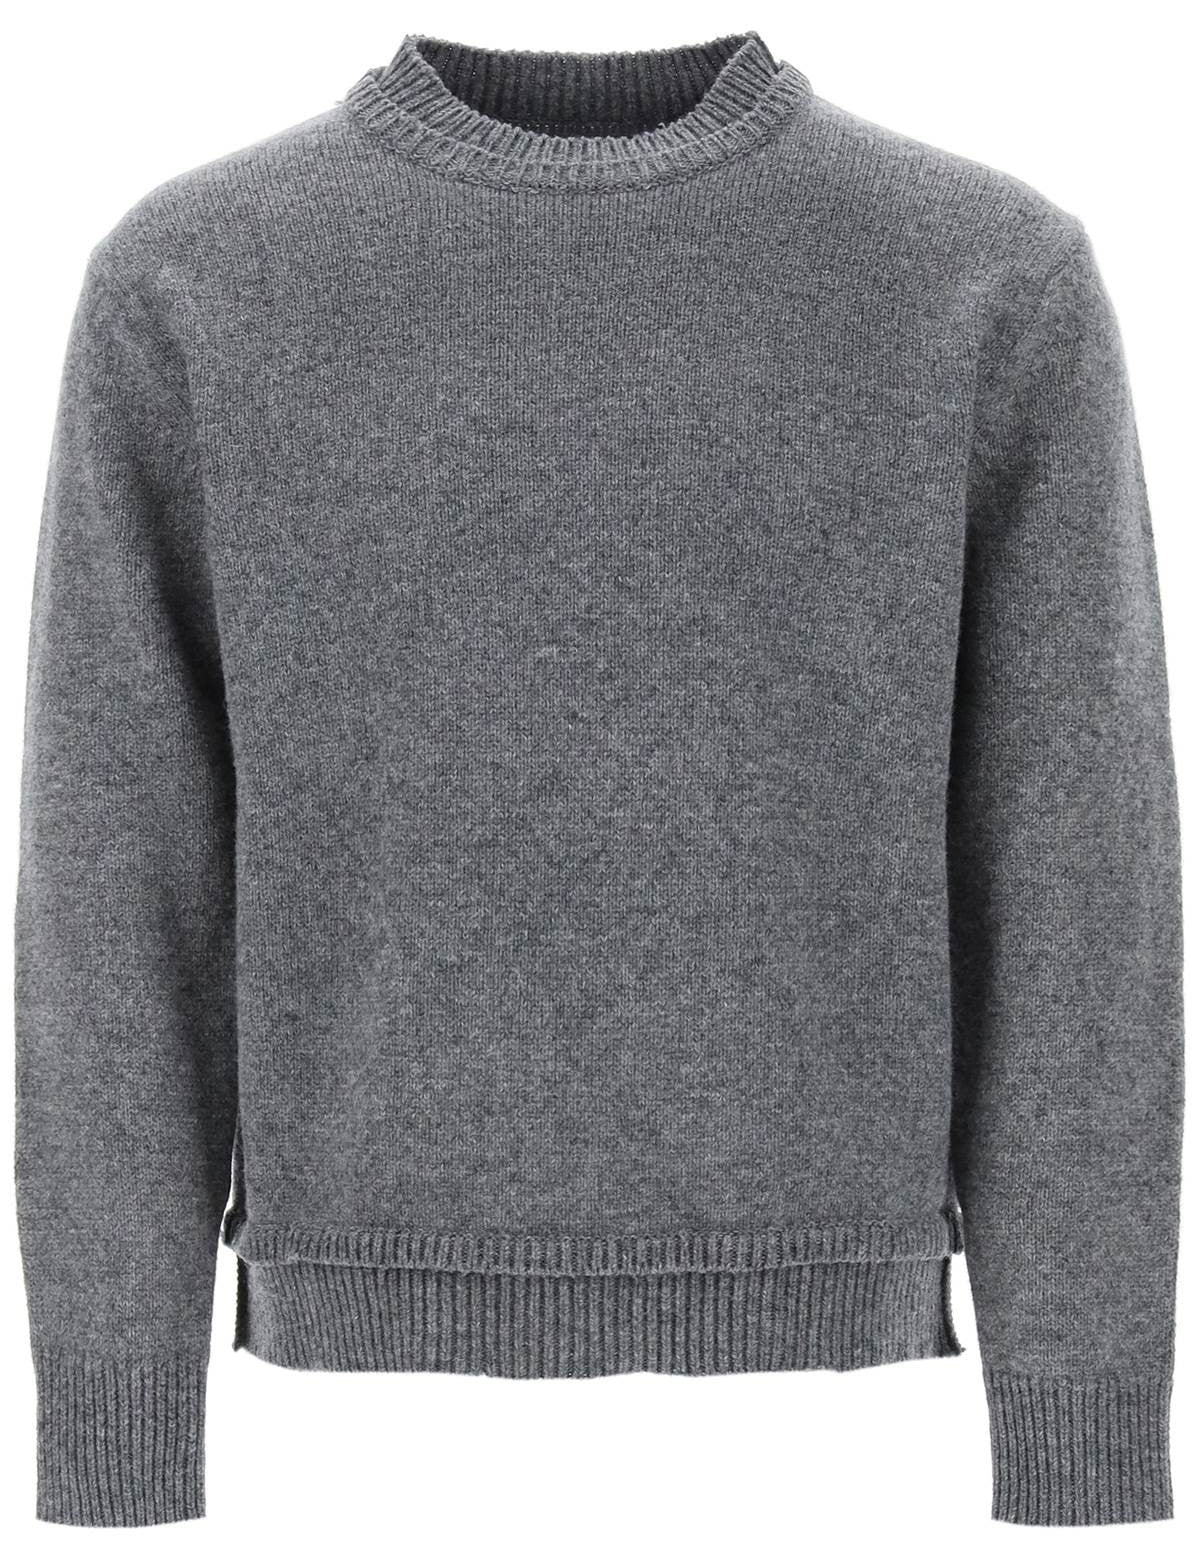 maison-margiela-crew-neck-sweater-with-elbow-patches.jpg